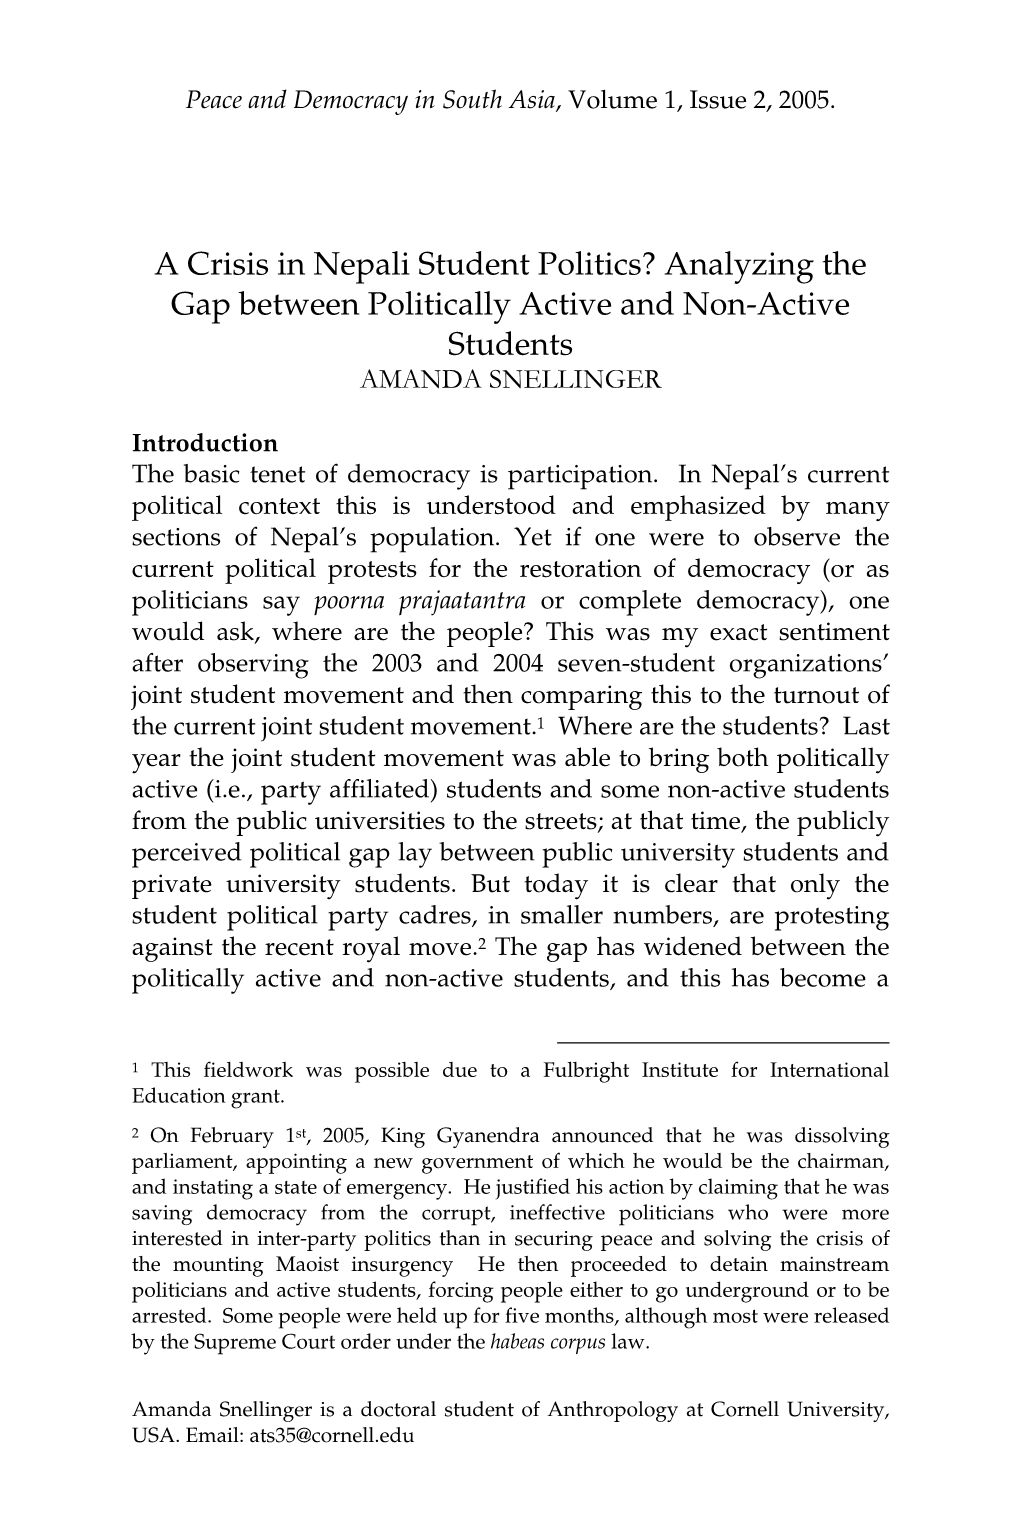 A Crisis in Nepali Student Politics? Analyzing the Gap Between Politically Active and Non-Active Students AMANDA SNELLINGER